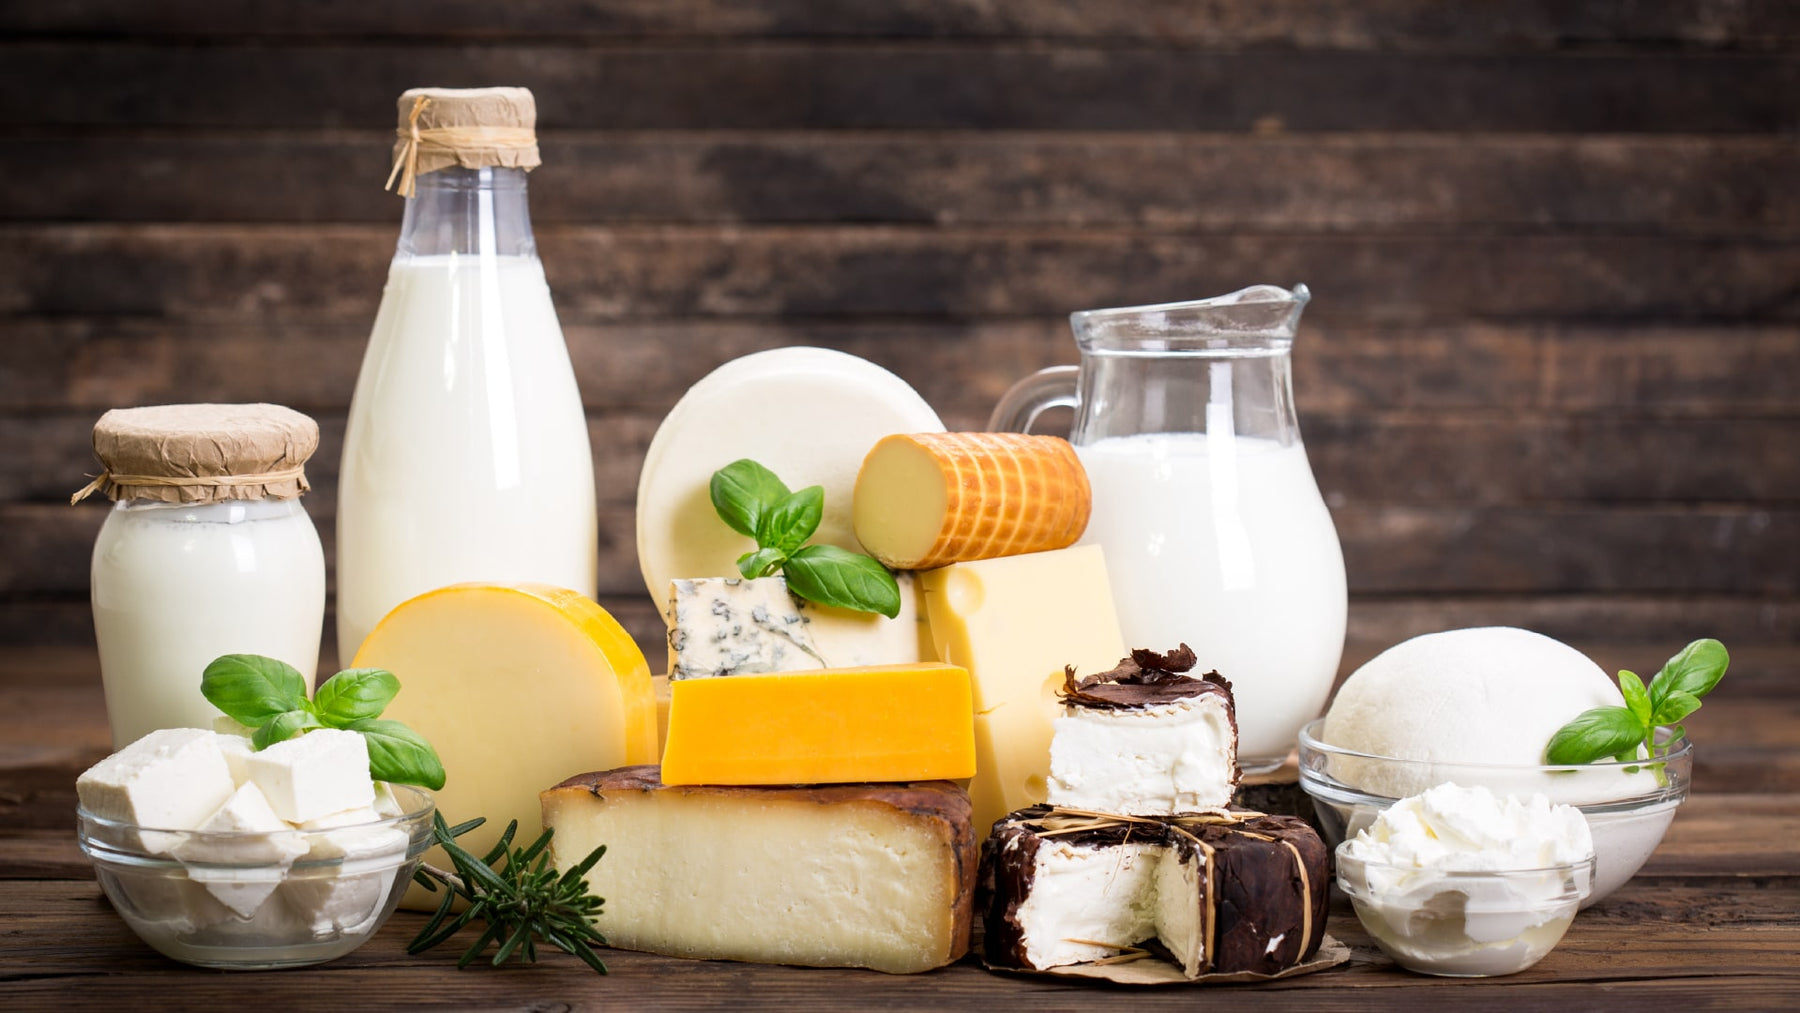 Dairy Products on a Keto Diet: Yay or Nay?